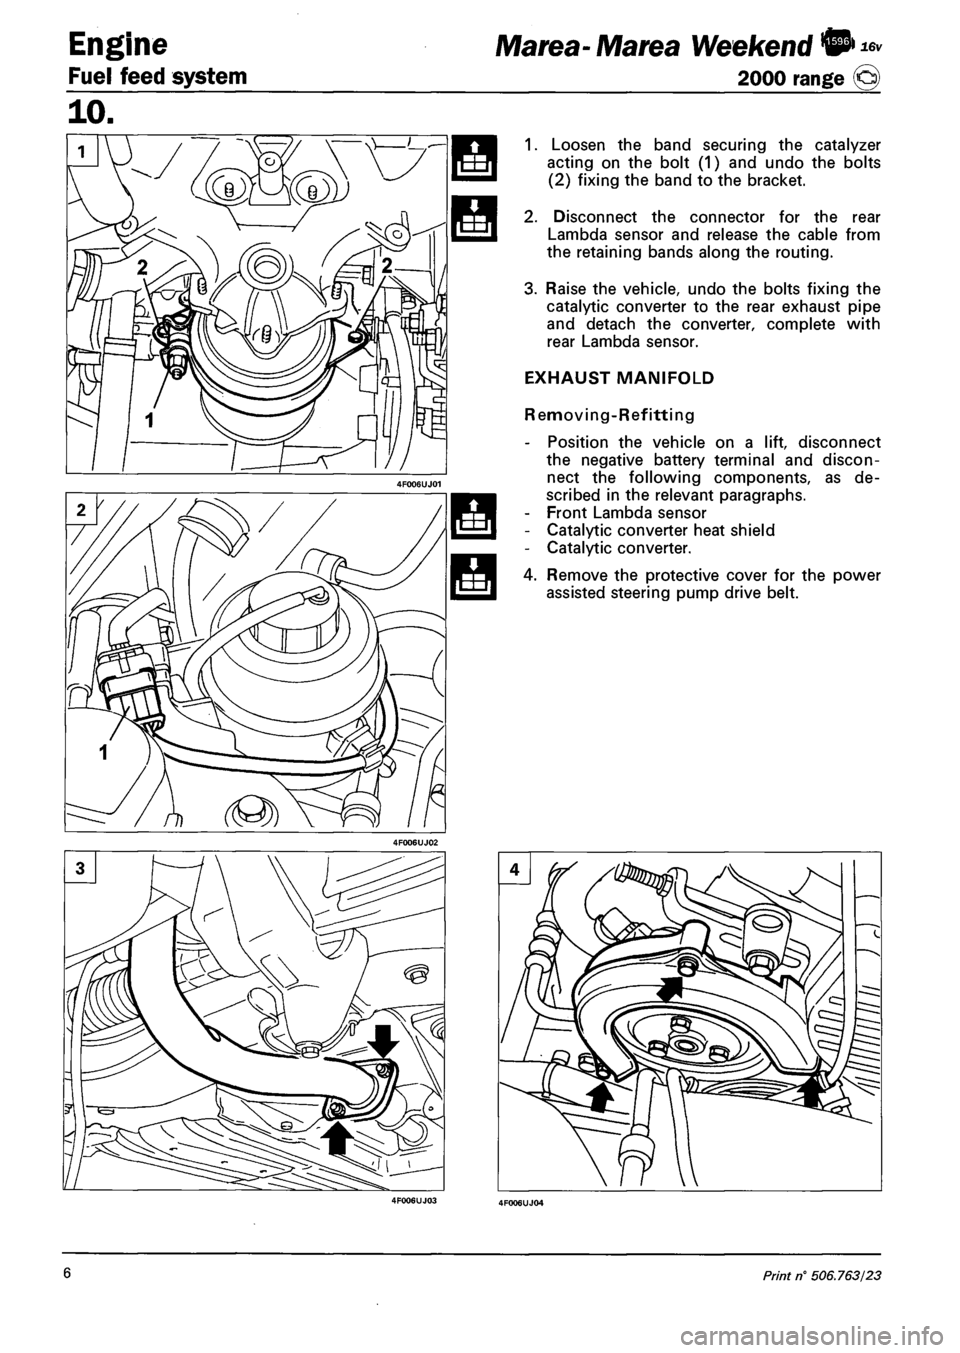 FIAT MAREA 2001 1.G Workshop Manual Engine 
Fuel feed system 
16v Marea- Marea Weekend © 
2000 range @ 
1. Loosen the band securing the catalyzer 
acting on the bolt (1) and undo the bolts 
(2) fixing the band to the bracket. 
2. Disco